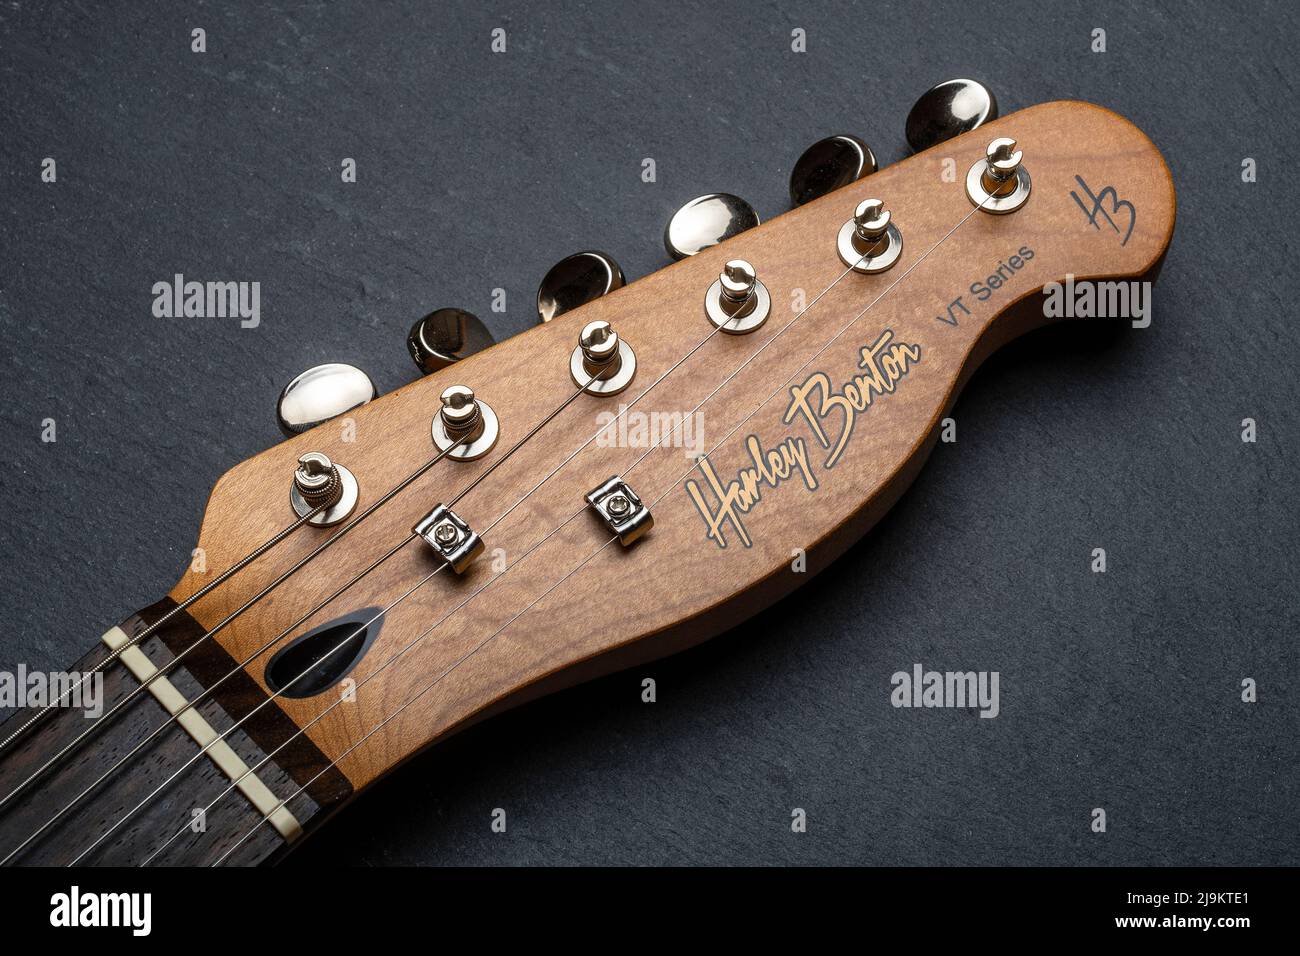 Carrara, Italy - May 24, 2022 - Headstock of a Harley Benton guitar with vintage tuners Stock Photo